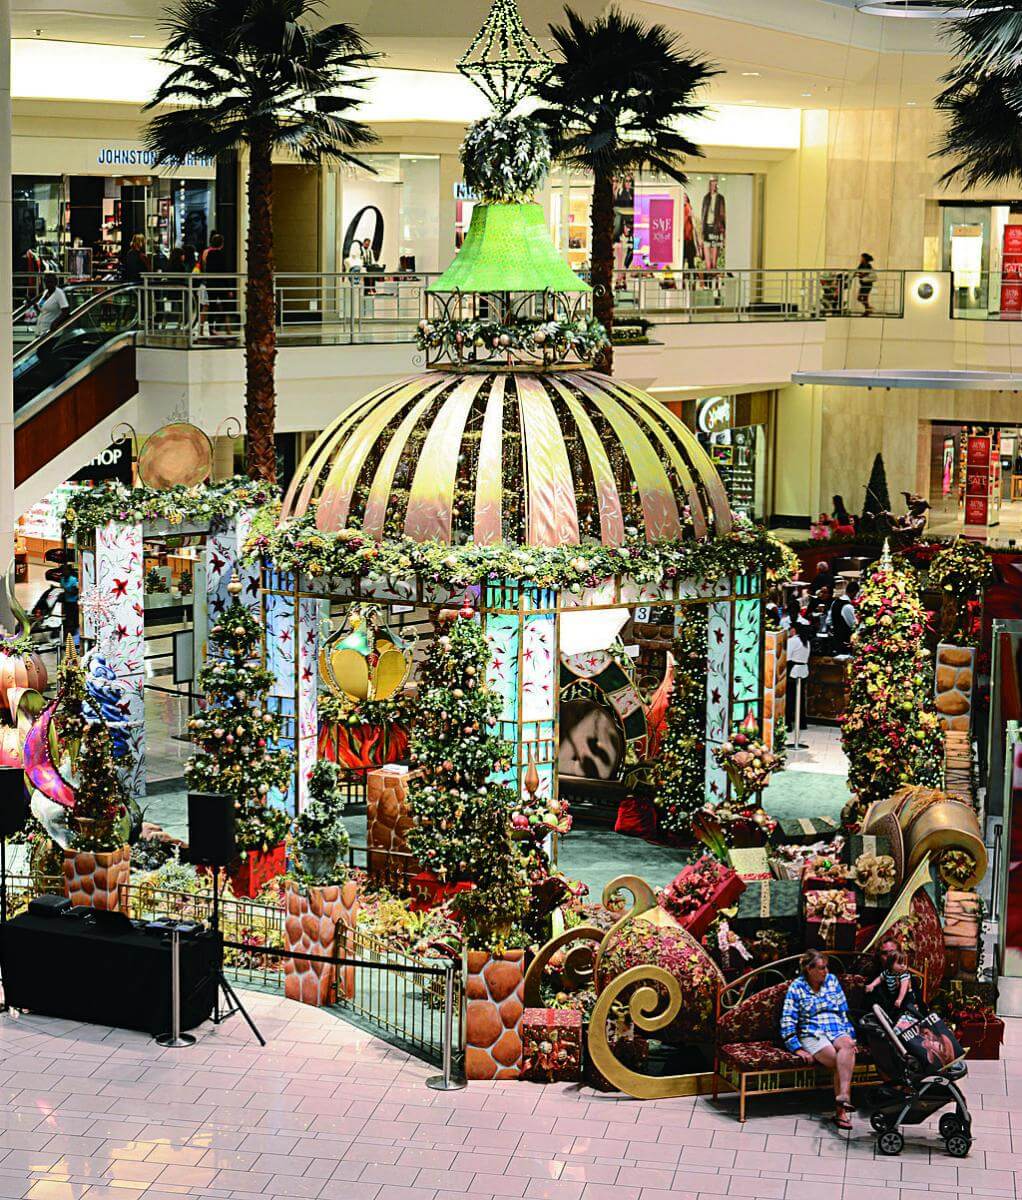 Palm Beach Gardens, FL : Gardens Mall photo, picture, image (Florida) at